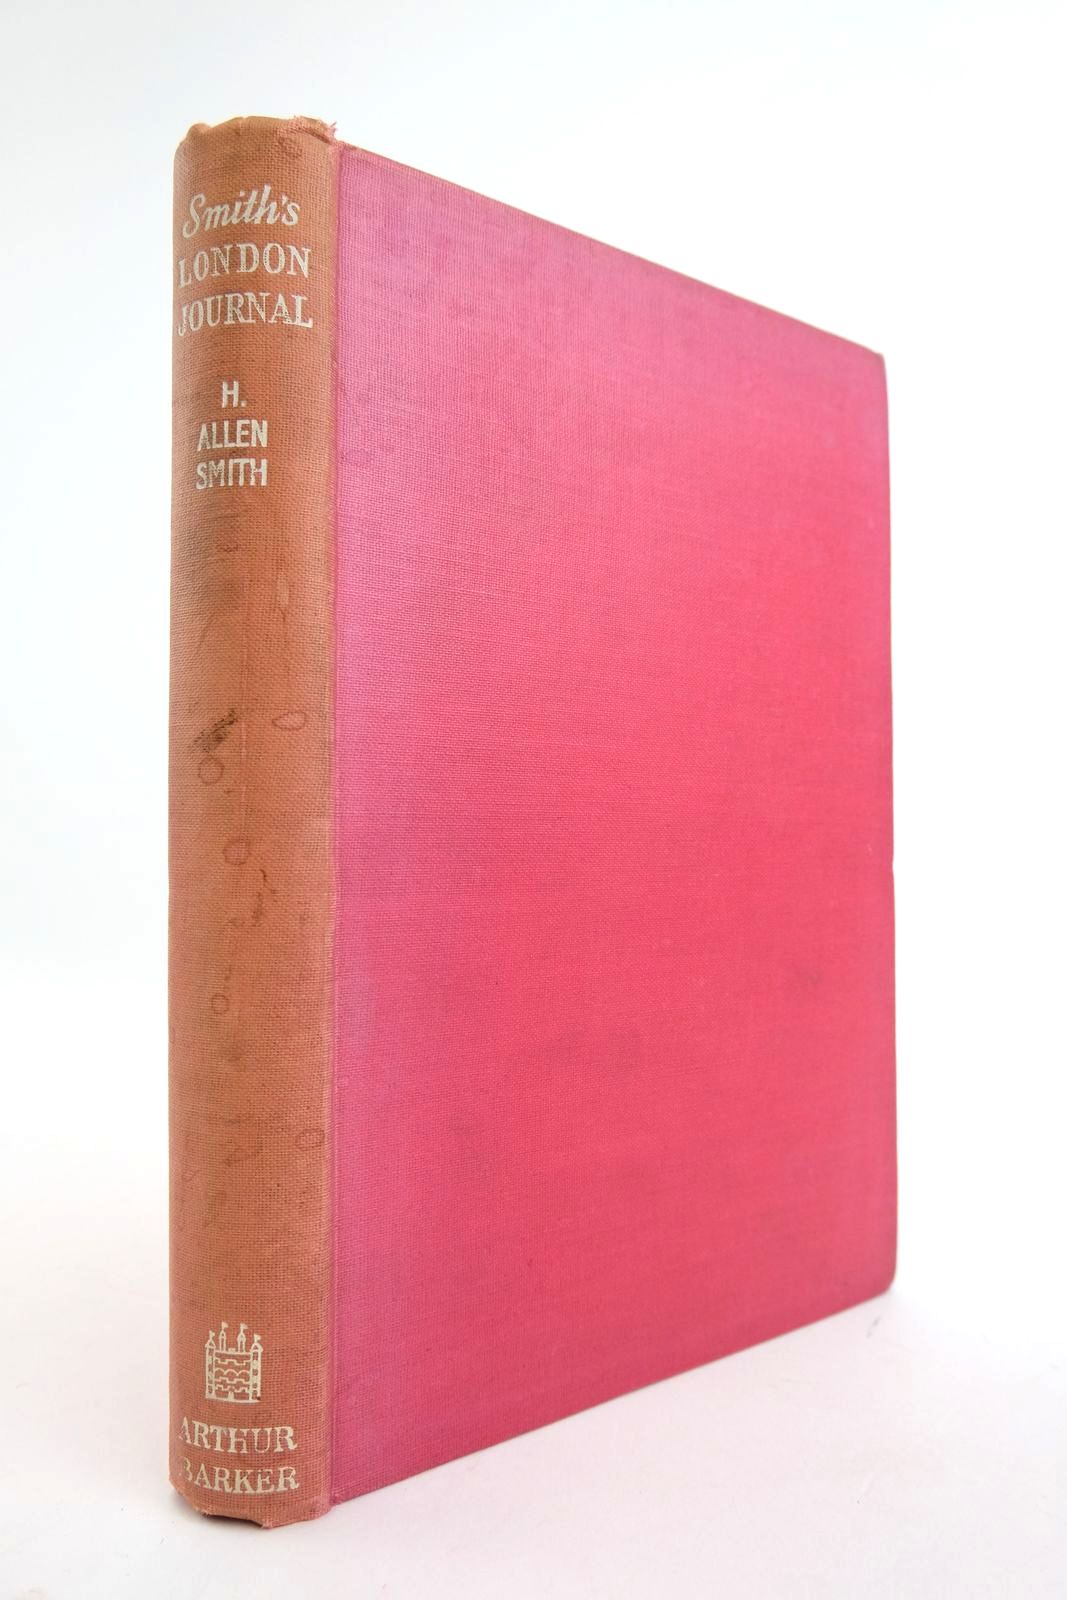 Photo of SMITH'S LONDON JOURNAL written by Smith, H. Allen published by Arthur Barker Ltd. (STOCK CODE: 2133852)  for sale by Stella & Rose's Books